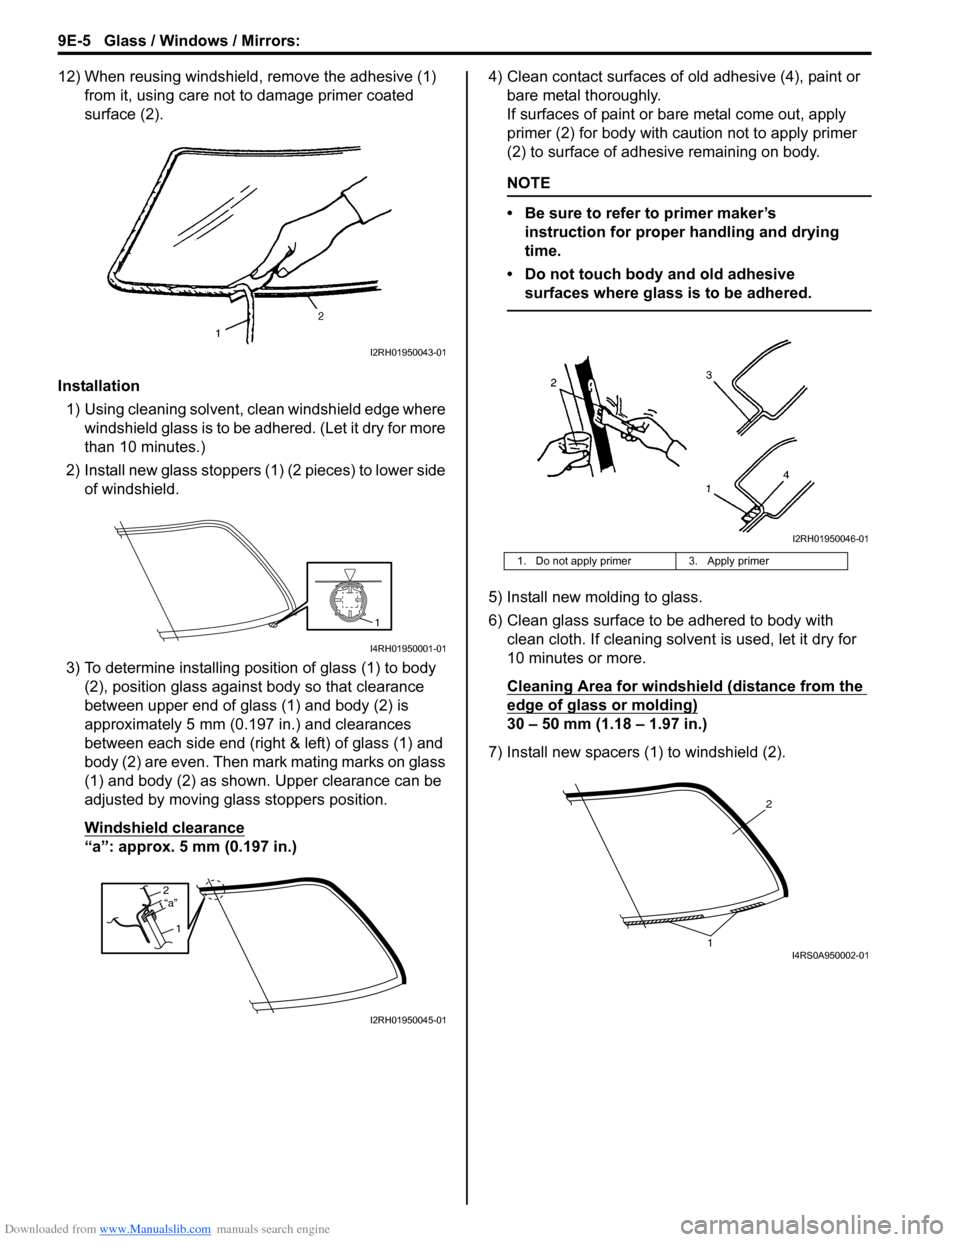 SUZUKI SWIFT 2007 2.G Service Workshop Manual Downloaded from www.Manualslib.com manuals search engine 9E-5 Glass / Windows / Mirrors: 
12) When reusing windshield, remove the adhesive (1) from it, using care not to damage primer coated 
surface 